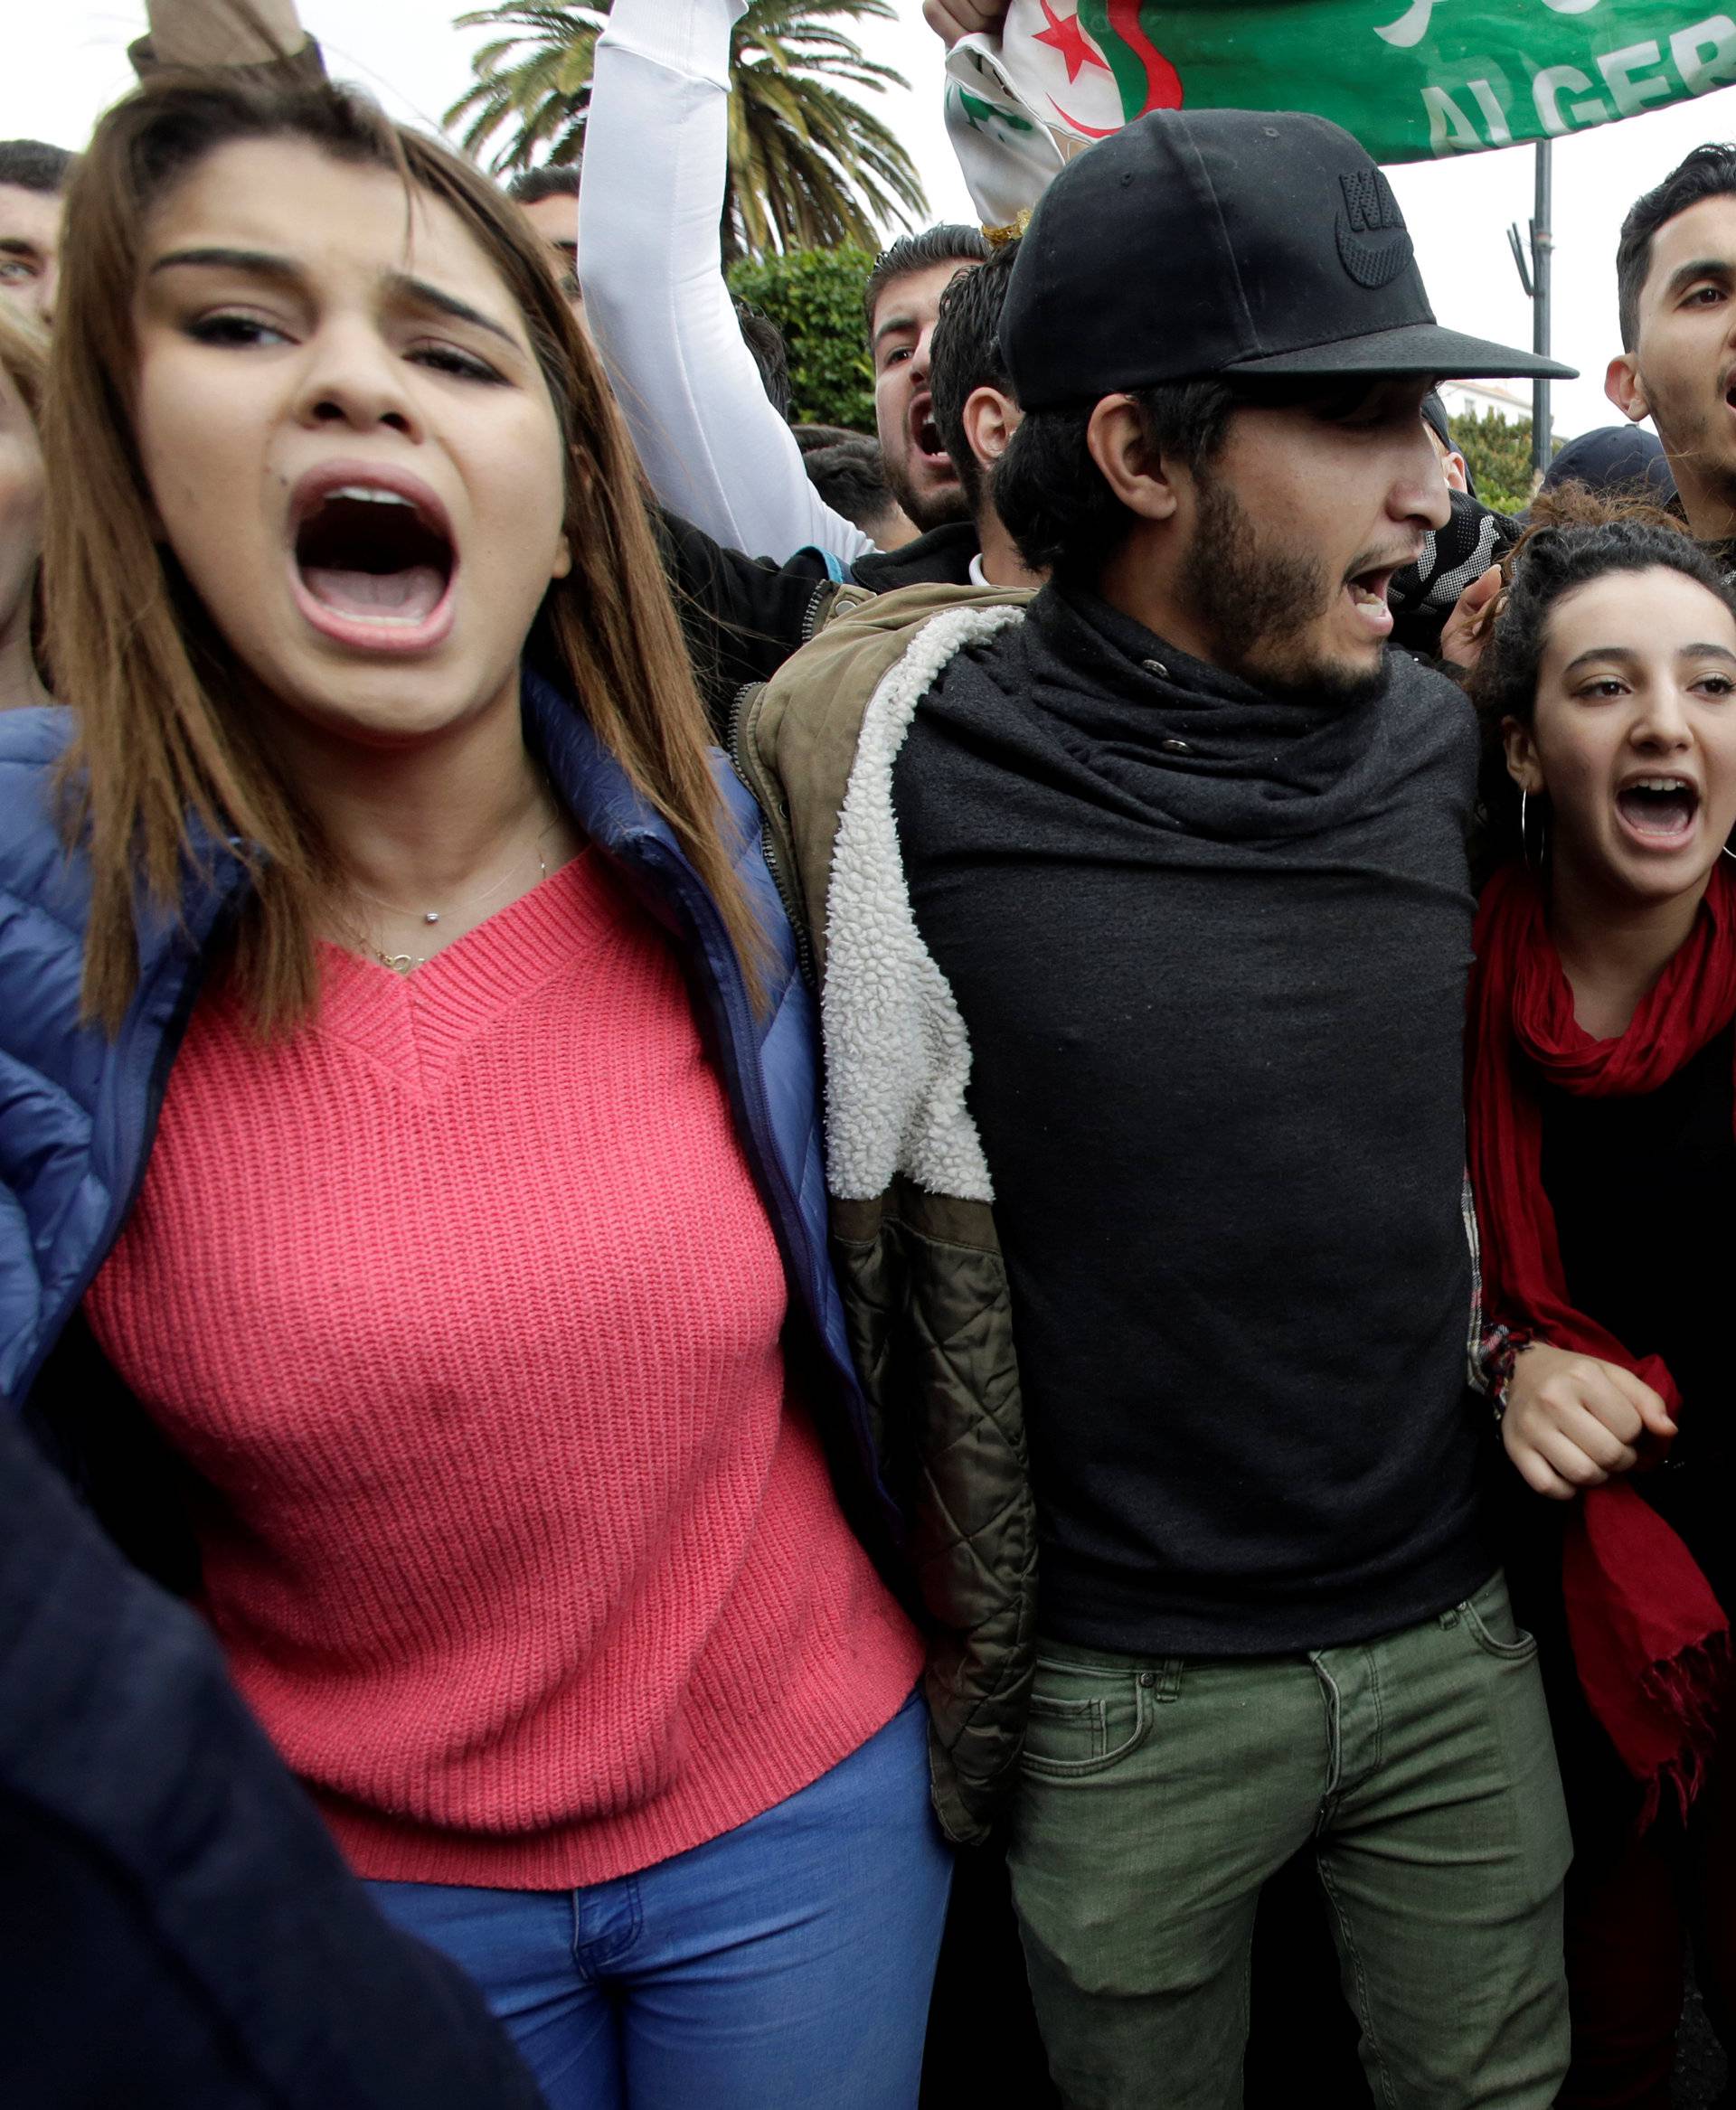 Police stand guard as students protest against President Abdelaziz Bouteflika's plan to extend his 20-year rule by seeking a fifth term in Algiers